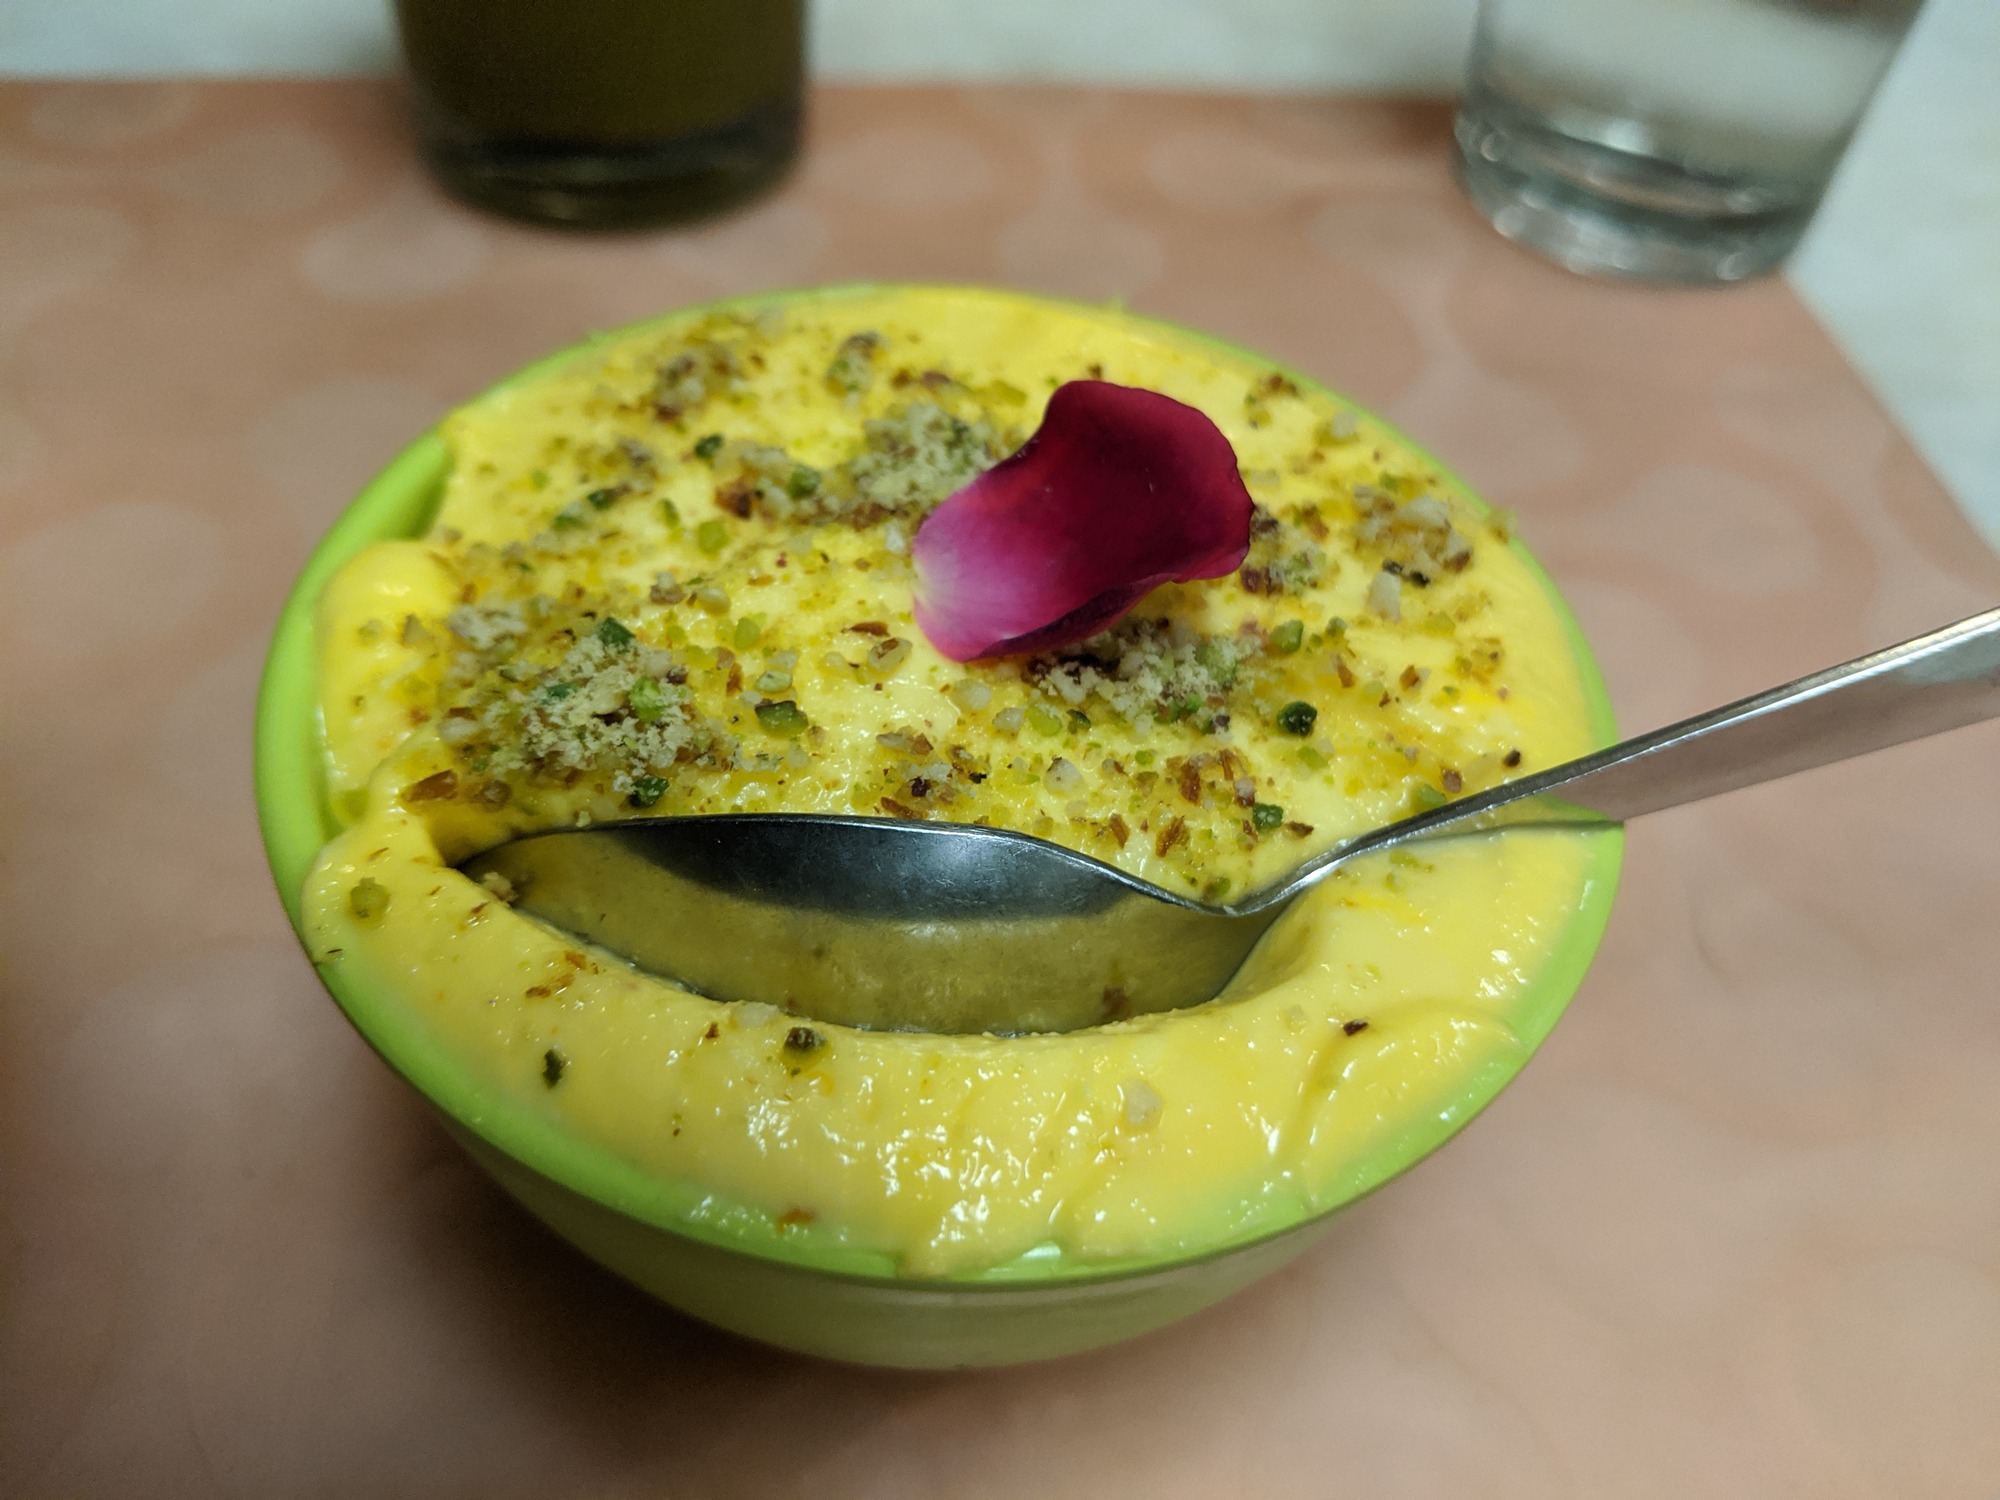 Shrikhand is an Indian sweet dish made of strained curd